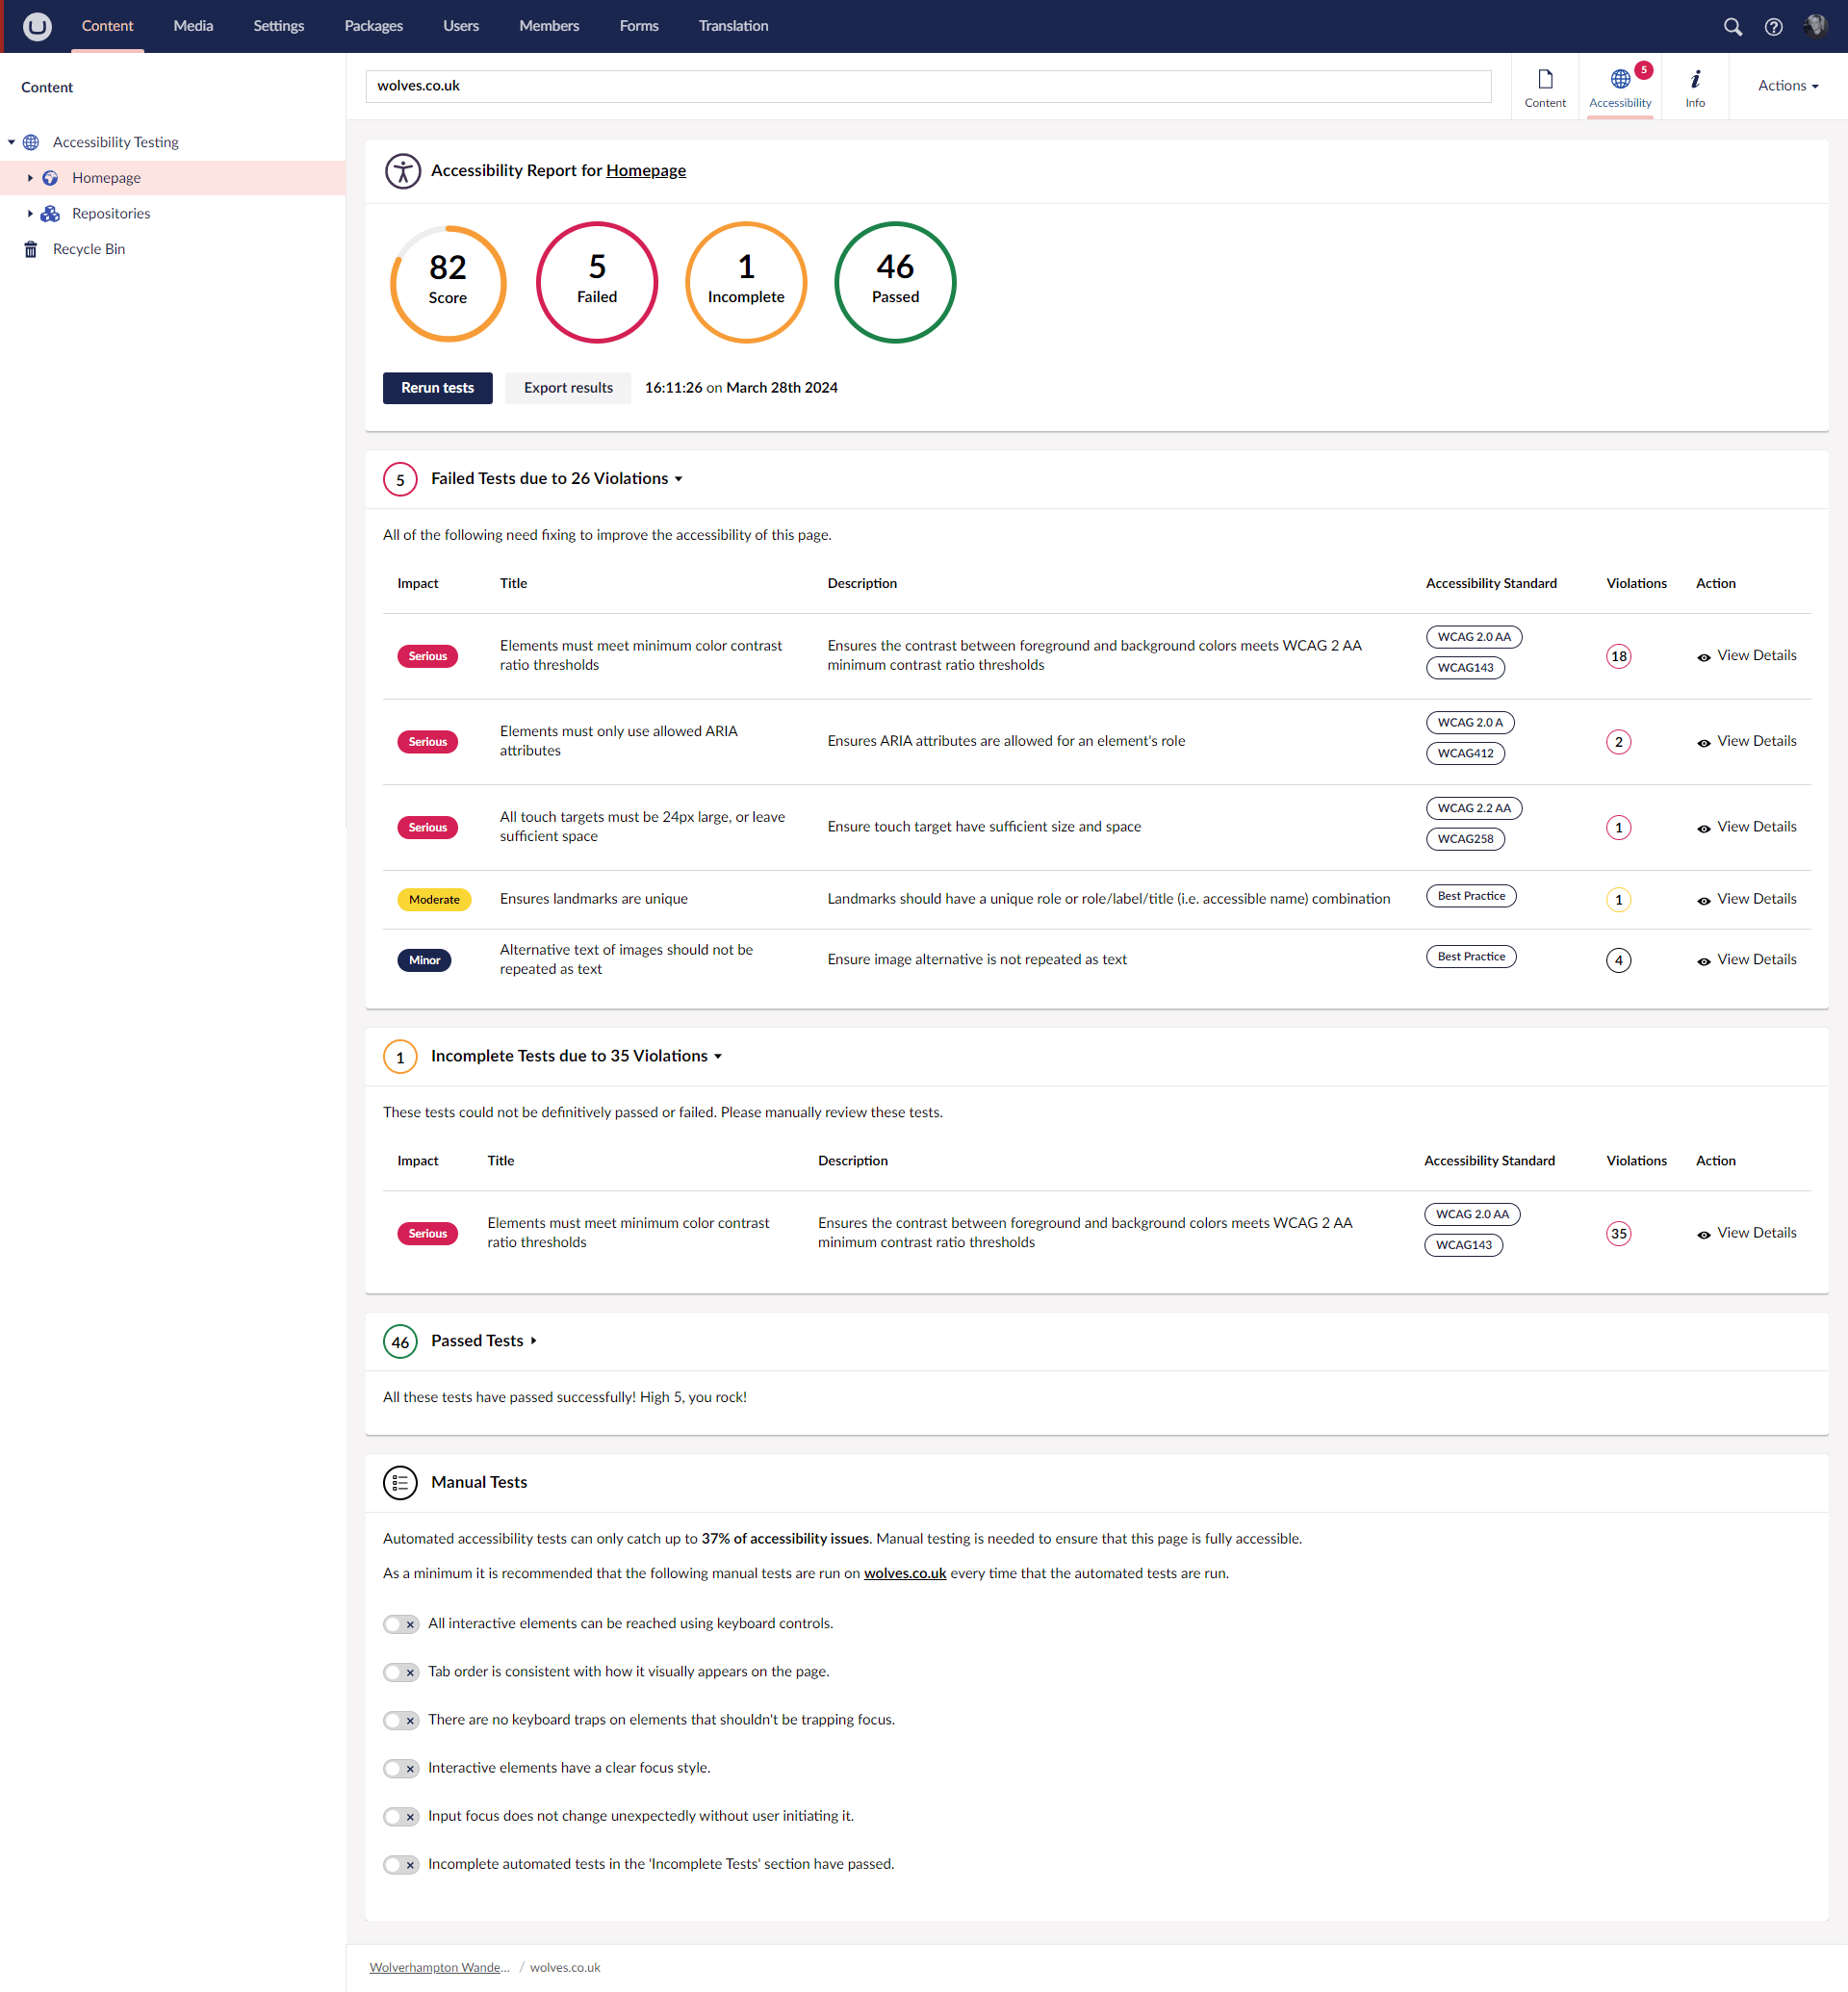 Dashboard of accessibility test results for a single page